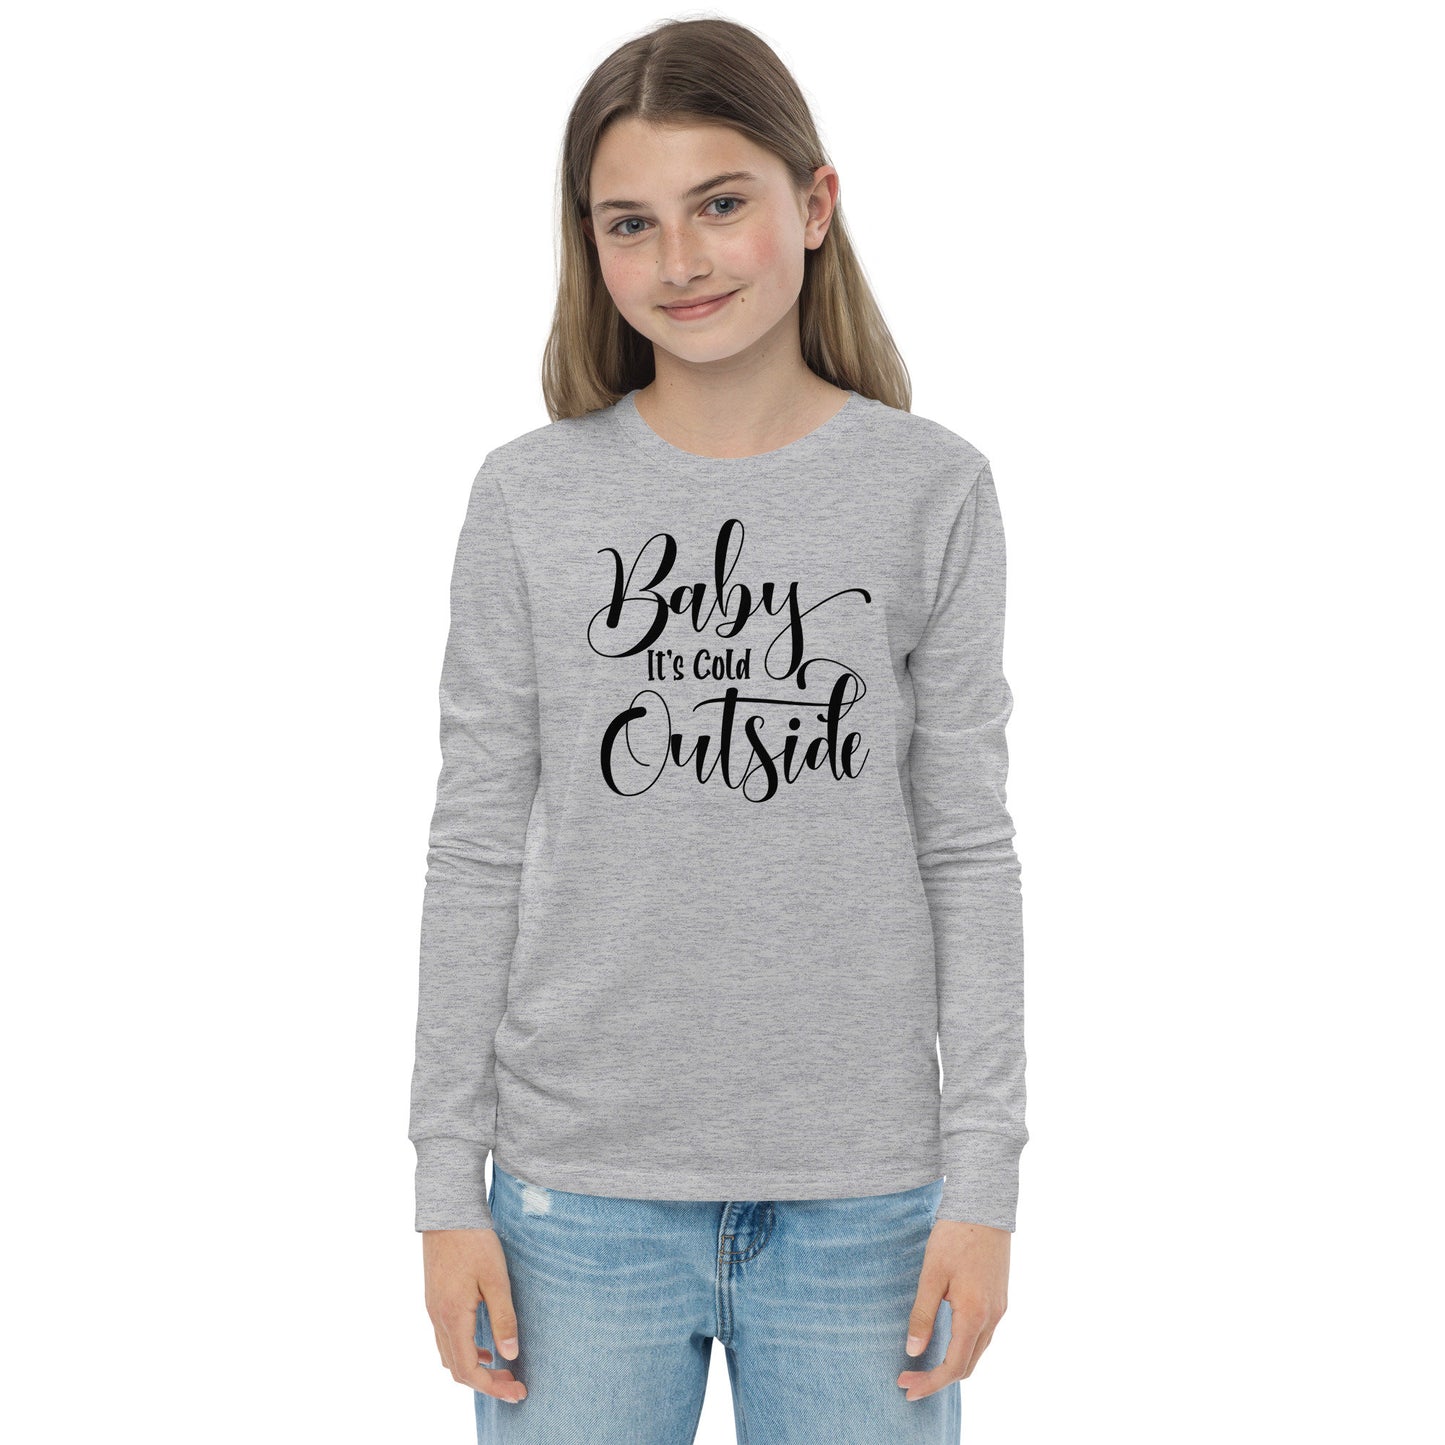 Baby It's Cold Outside - Fun Winter - Cute Winter Words - Youth long sleeve tee